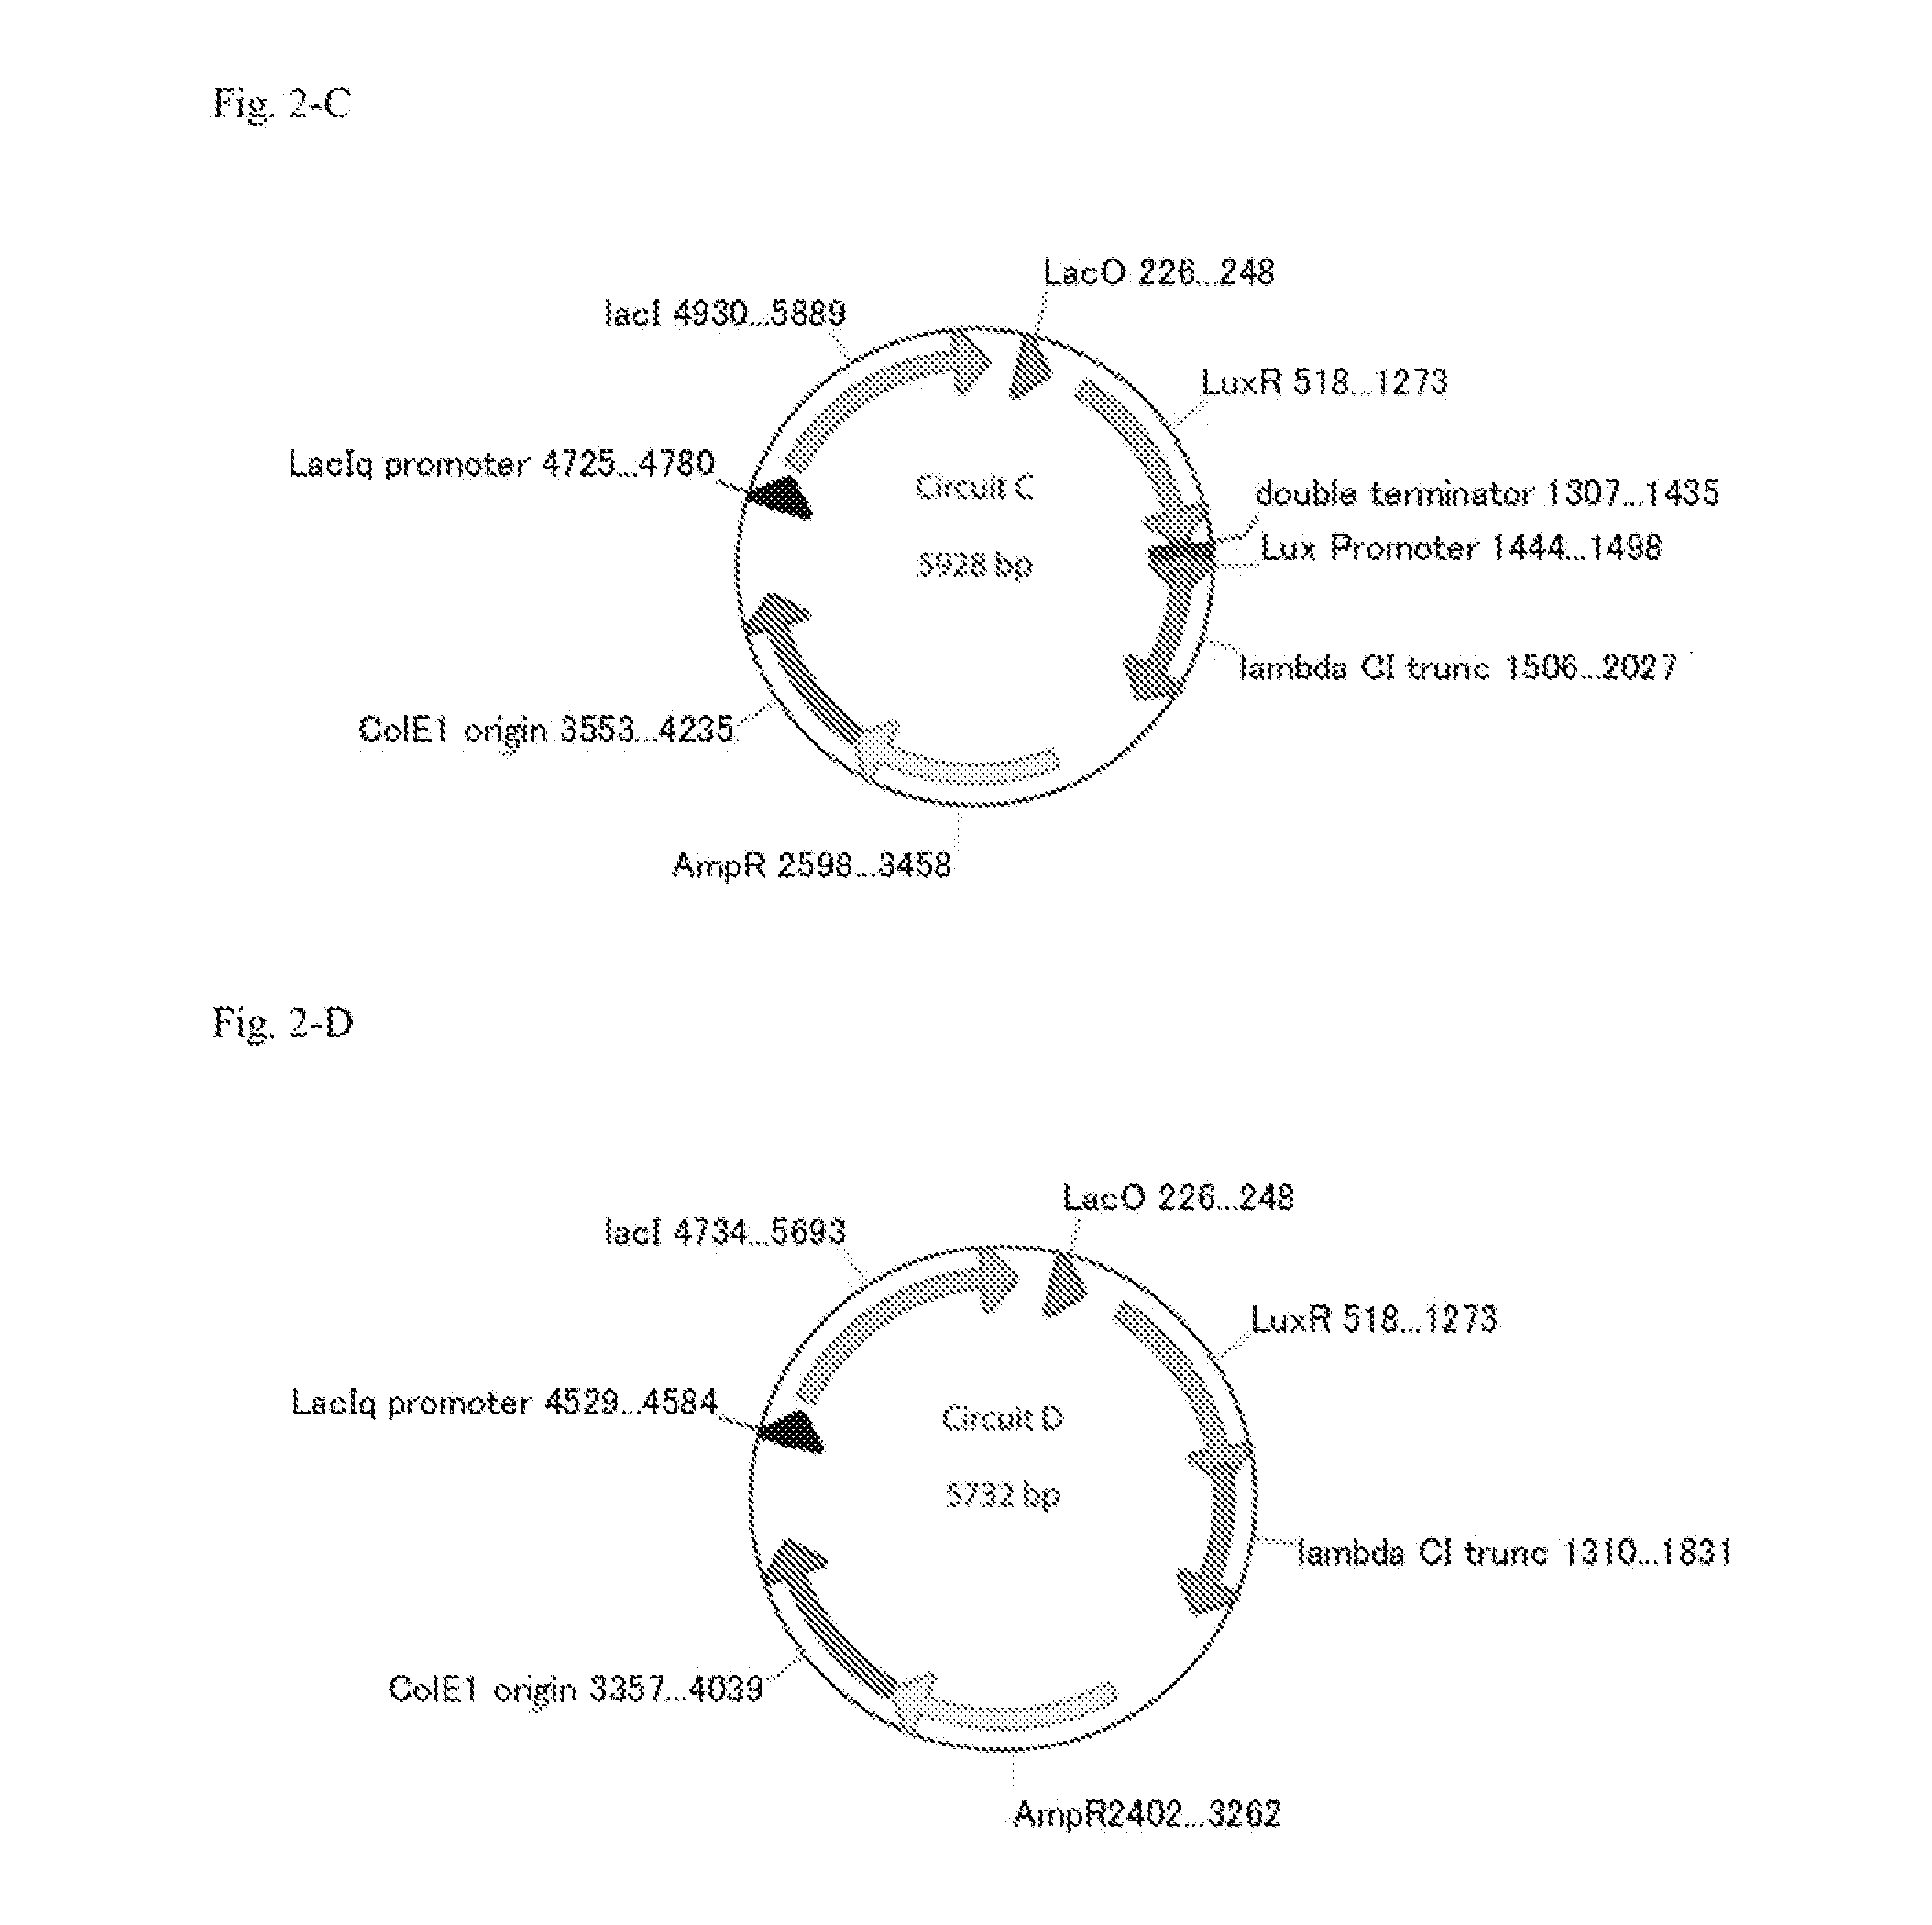 Method For Rapidly Developing Gene Switches And Gene Circuits